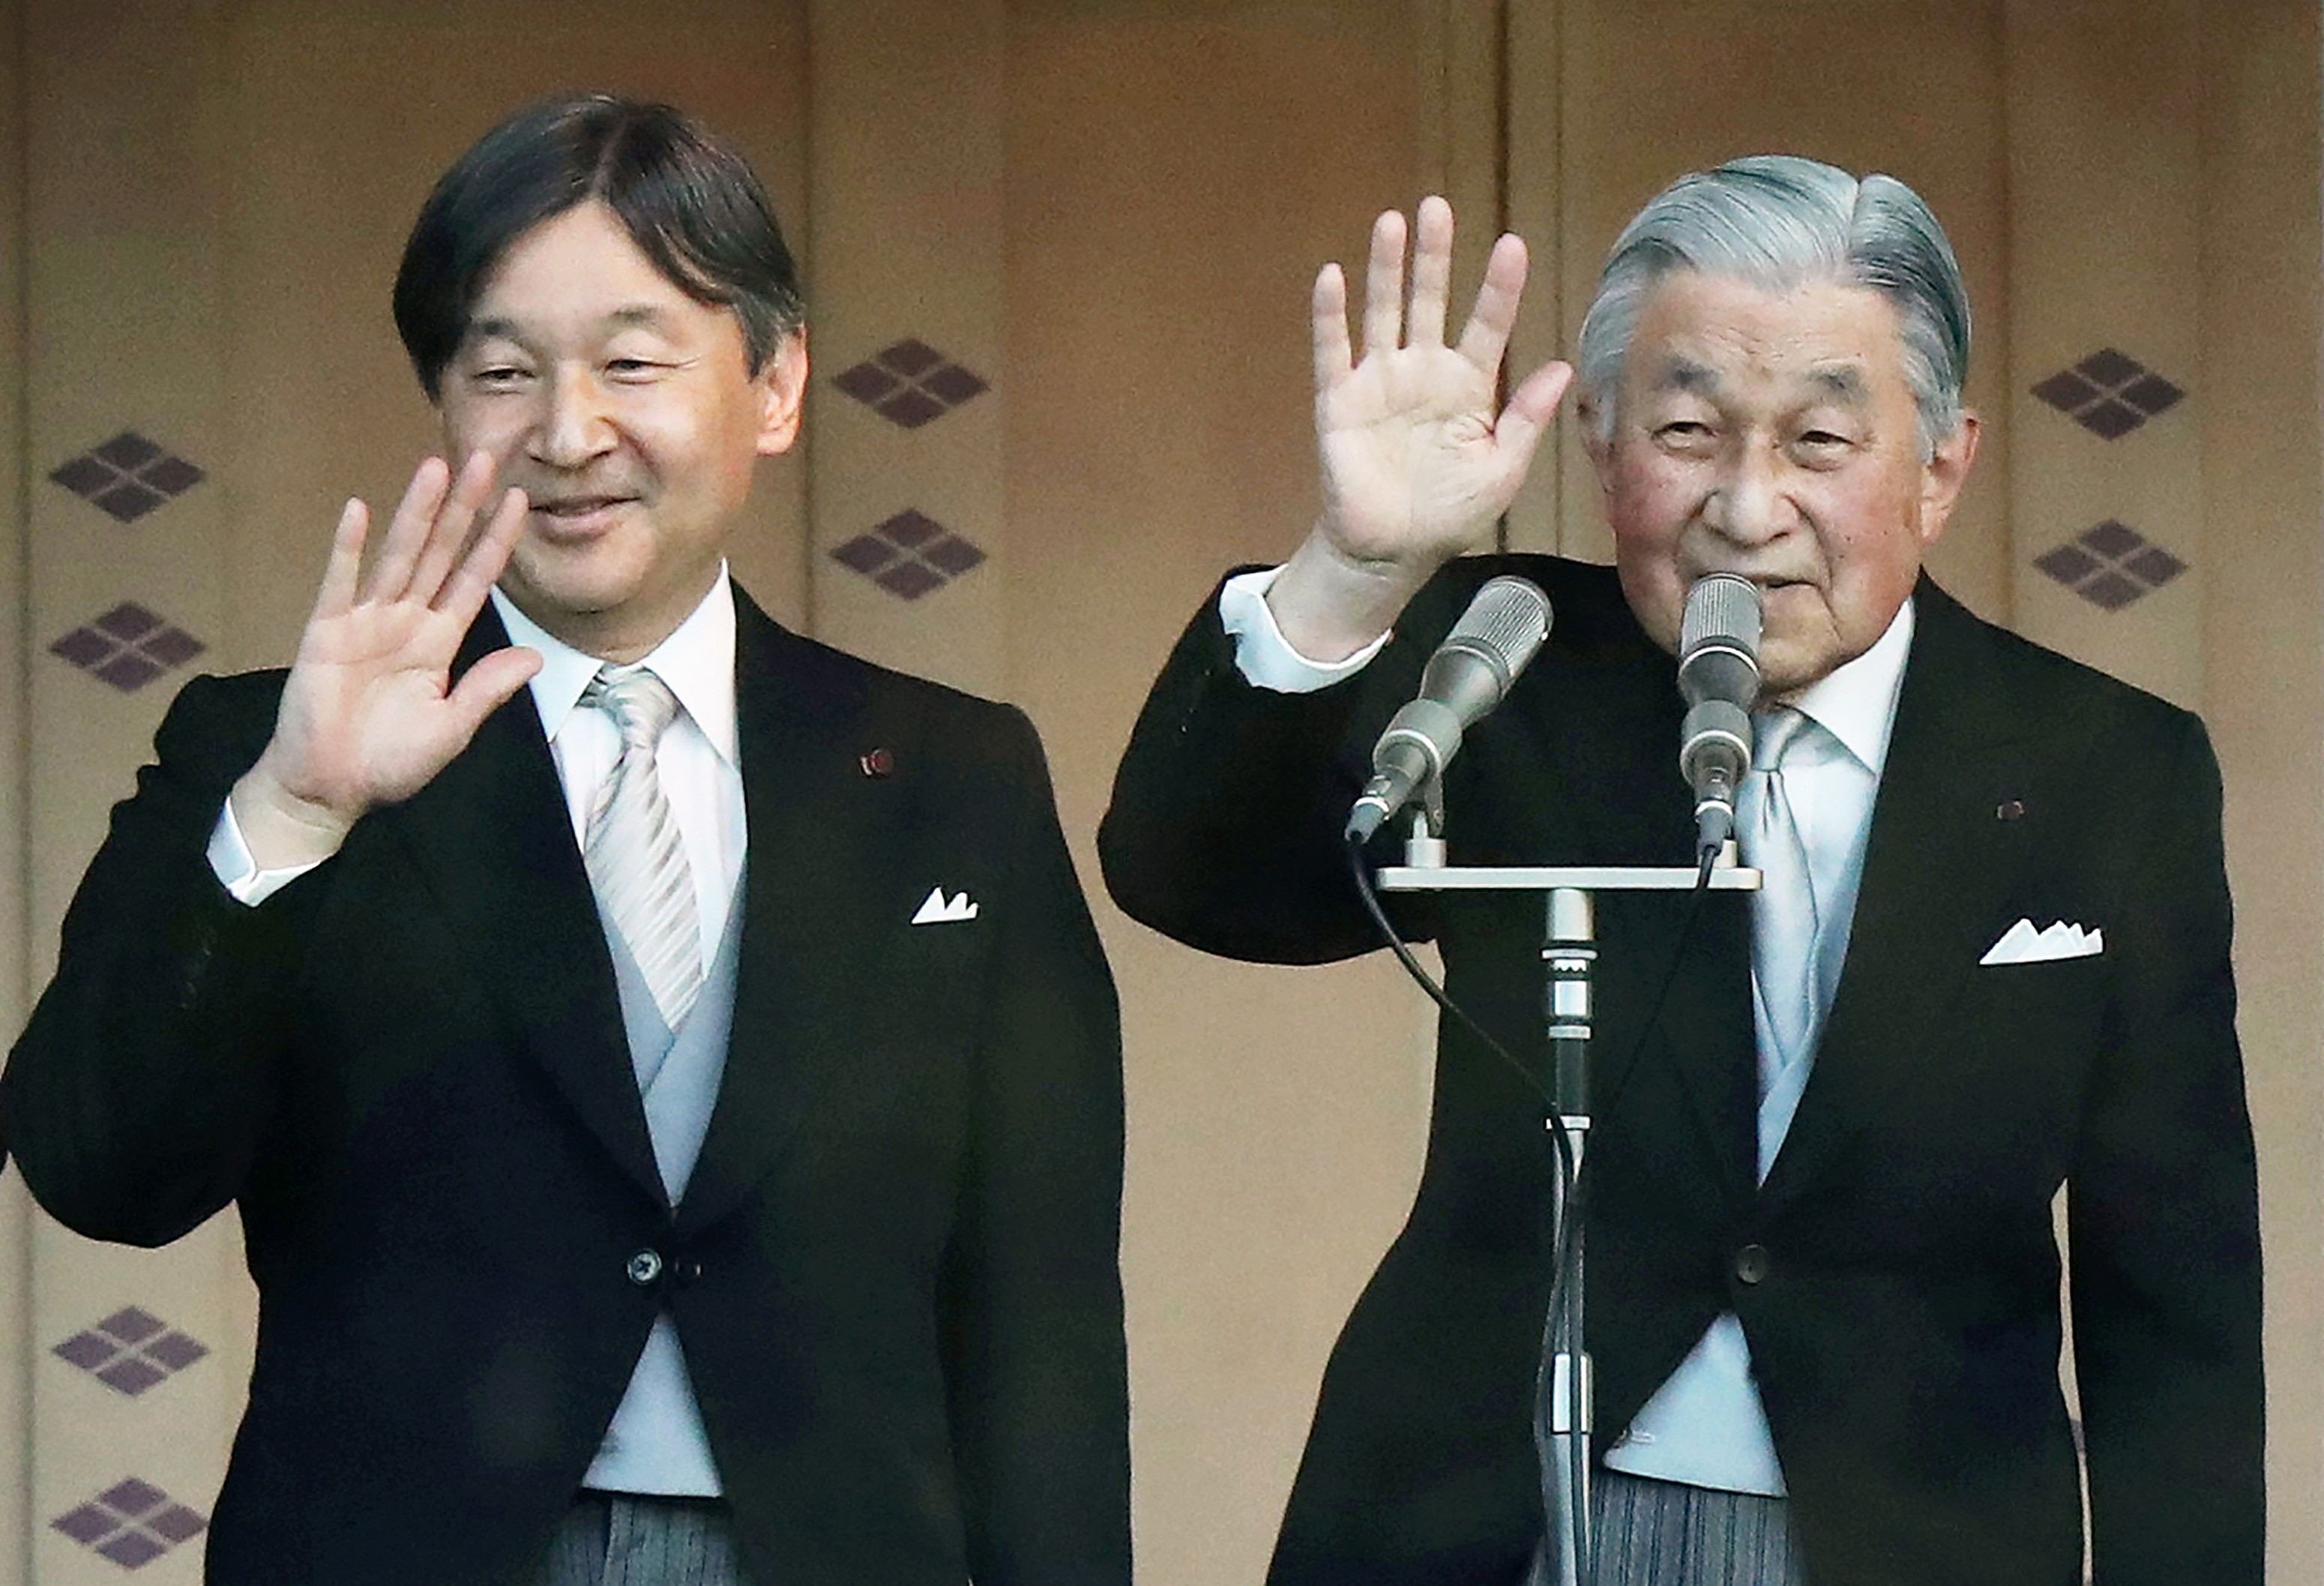 Japan’s Emperor Akihito (right) and Crown Prince Naruhito wave to the crowd at the Imperial Palace in Tokyo on January 2, after the emperor delivered his final New Year’s address. Photo: AFP